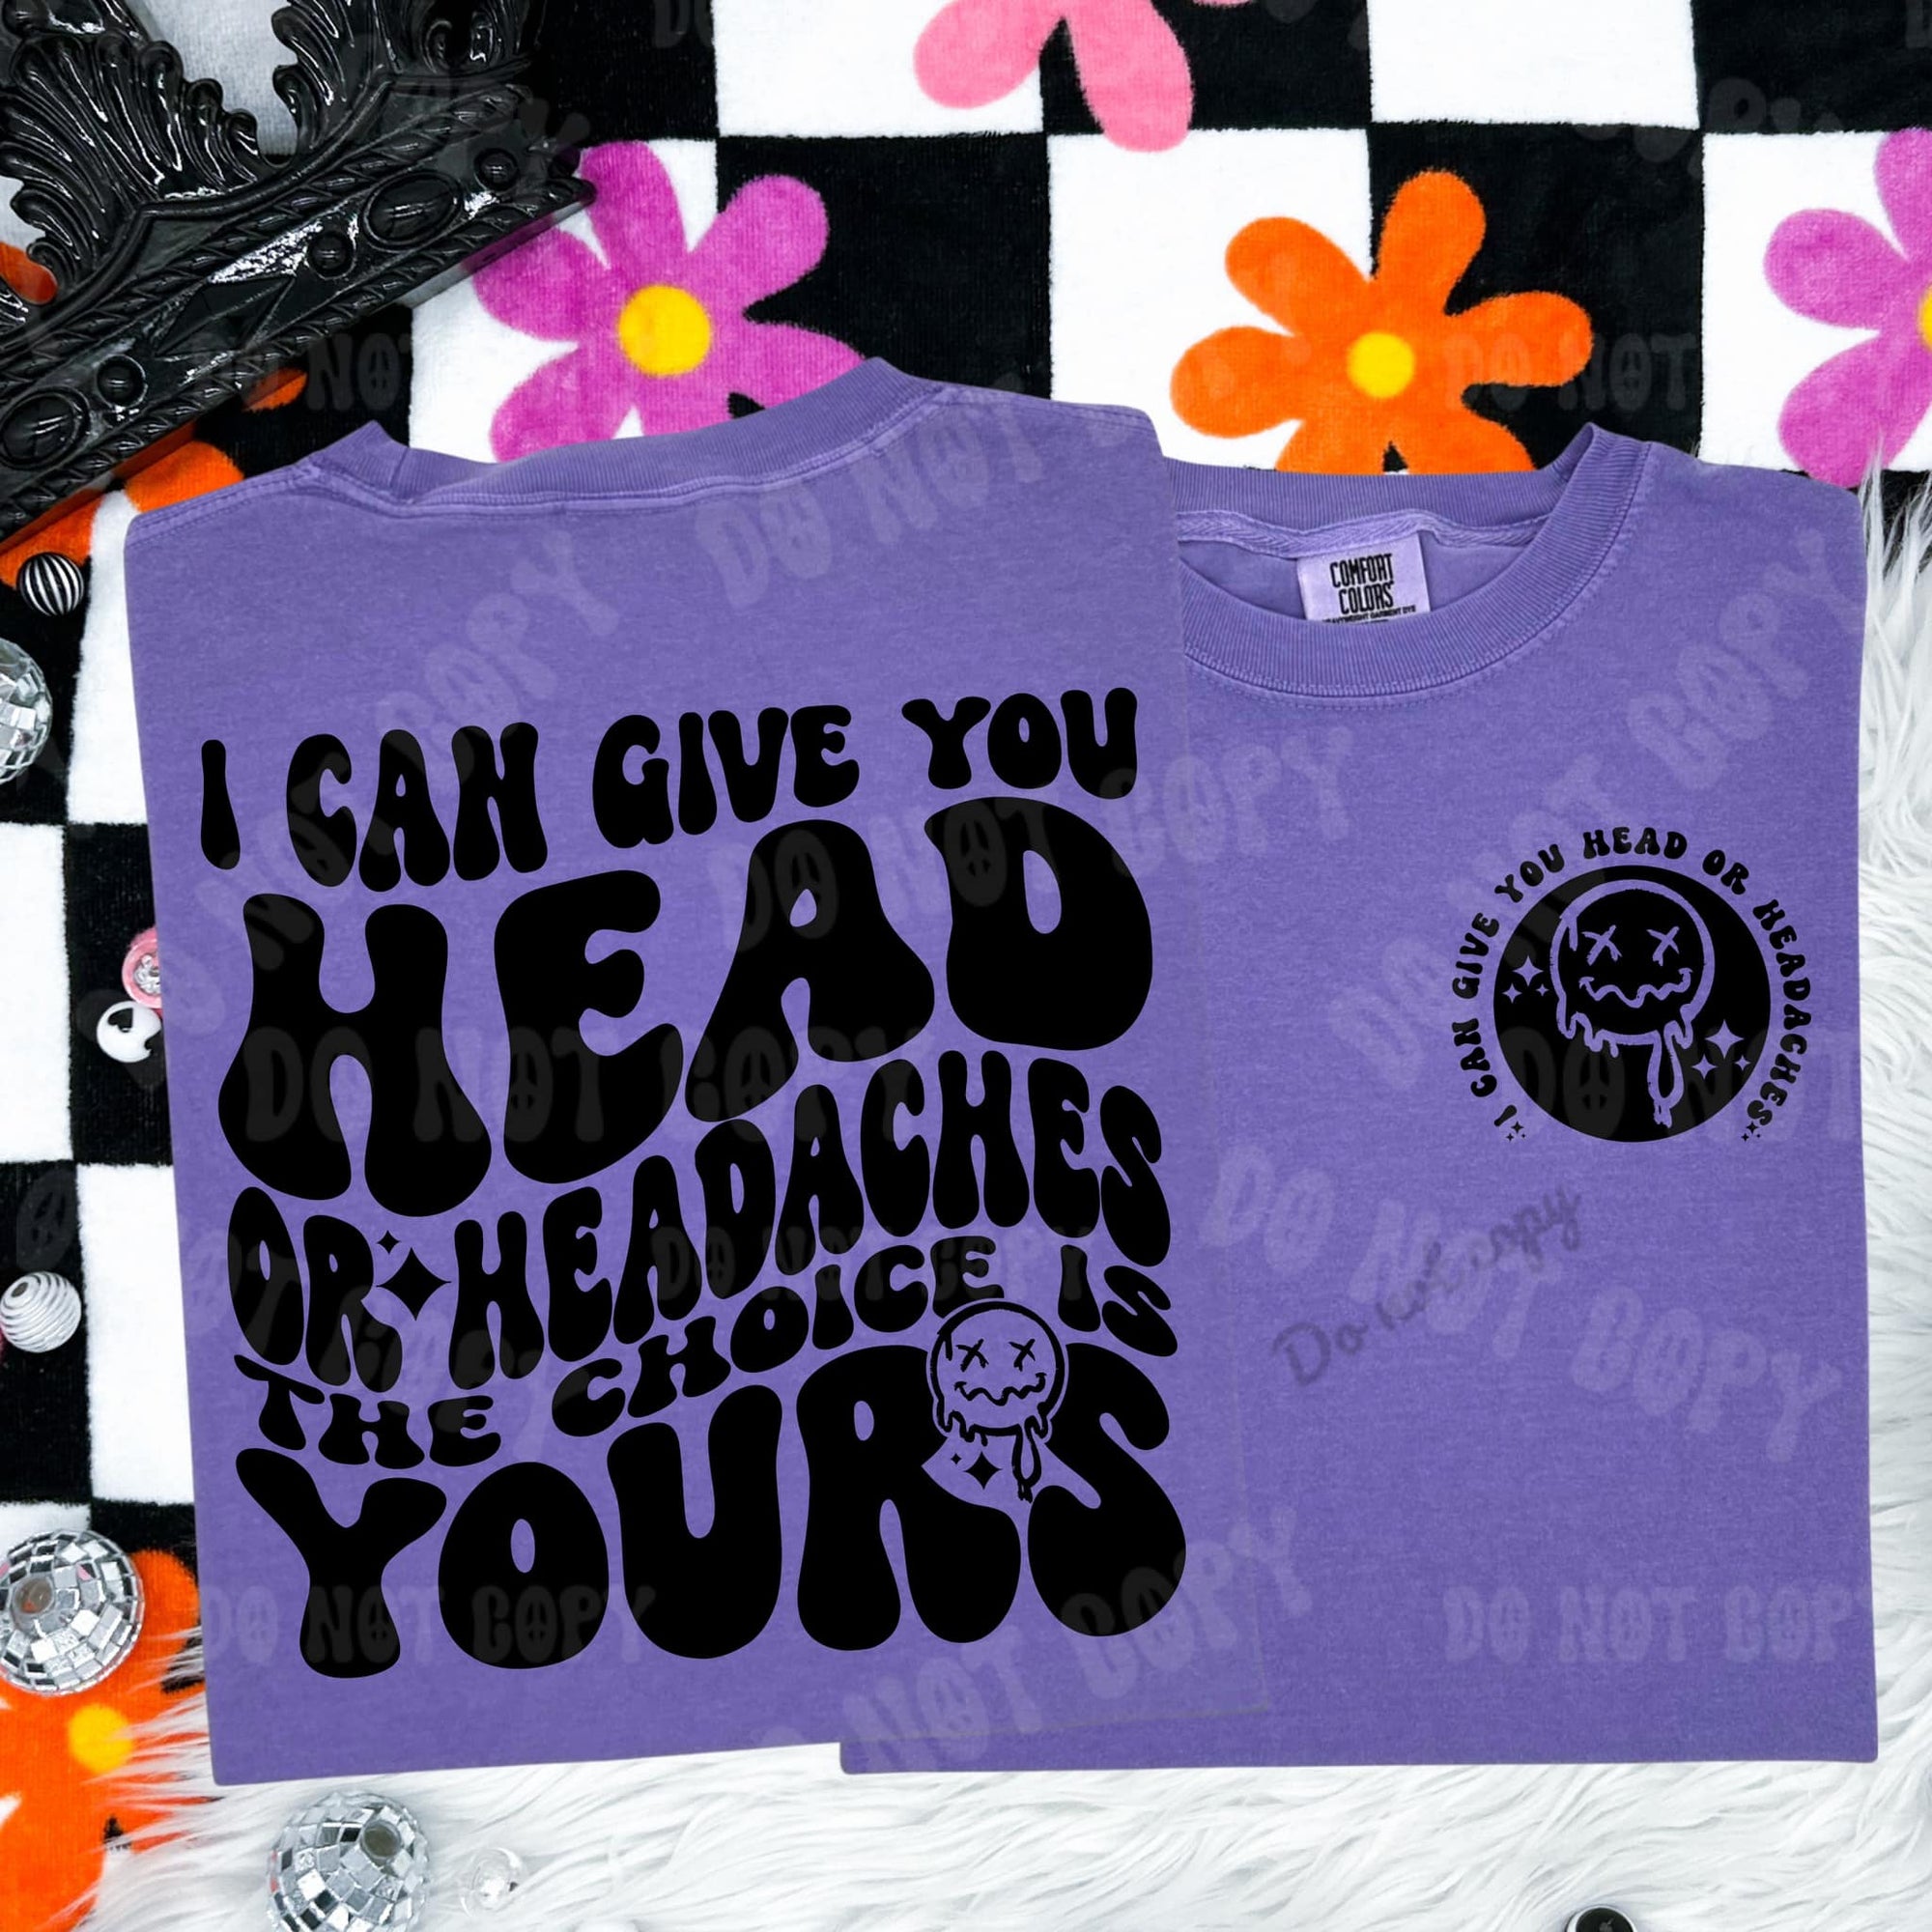 I can give you head or headaches Graphic Tee